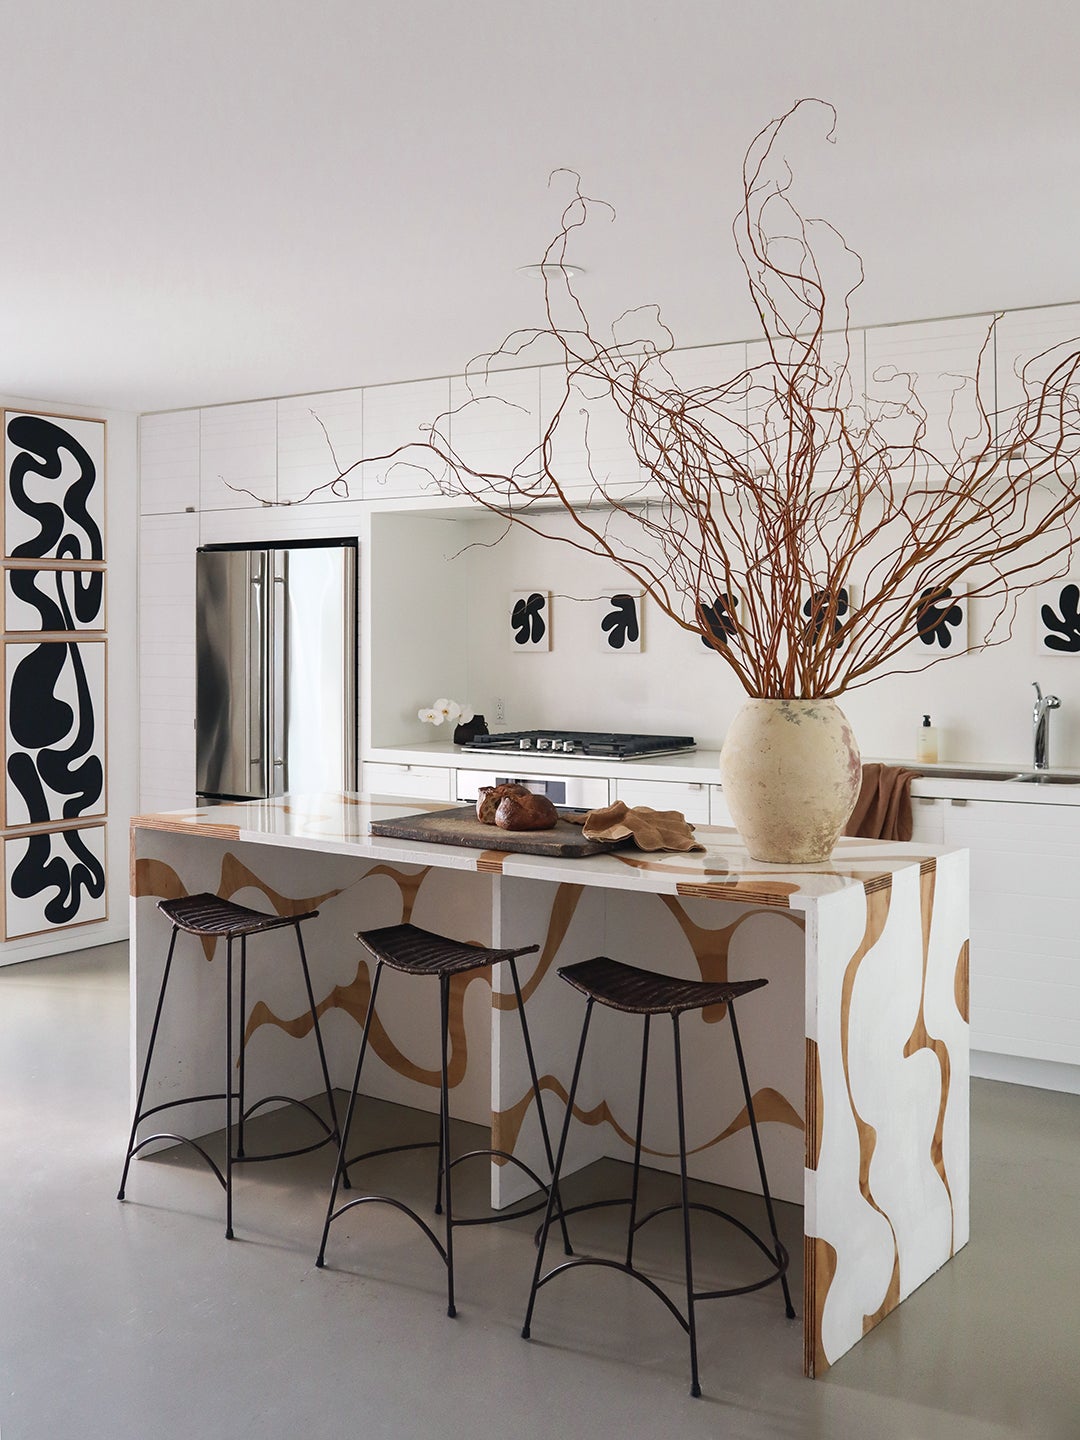 Even the Kitchen Island in This L.A. Artist’s Home Is Covered in Her Signature Waves